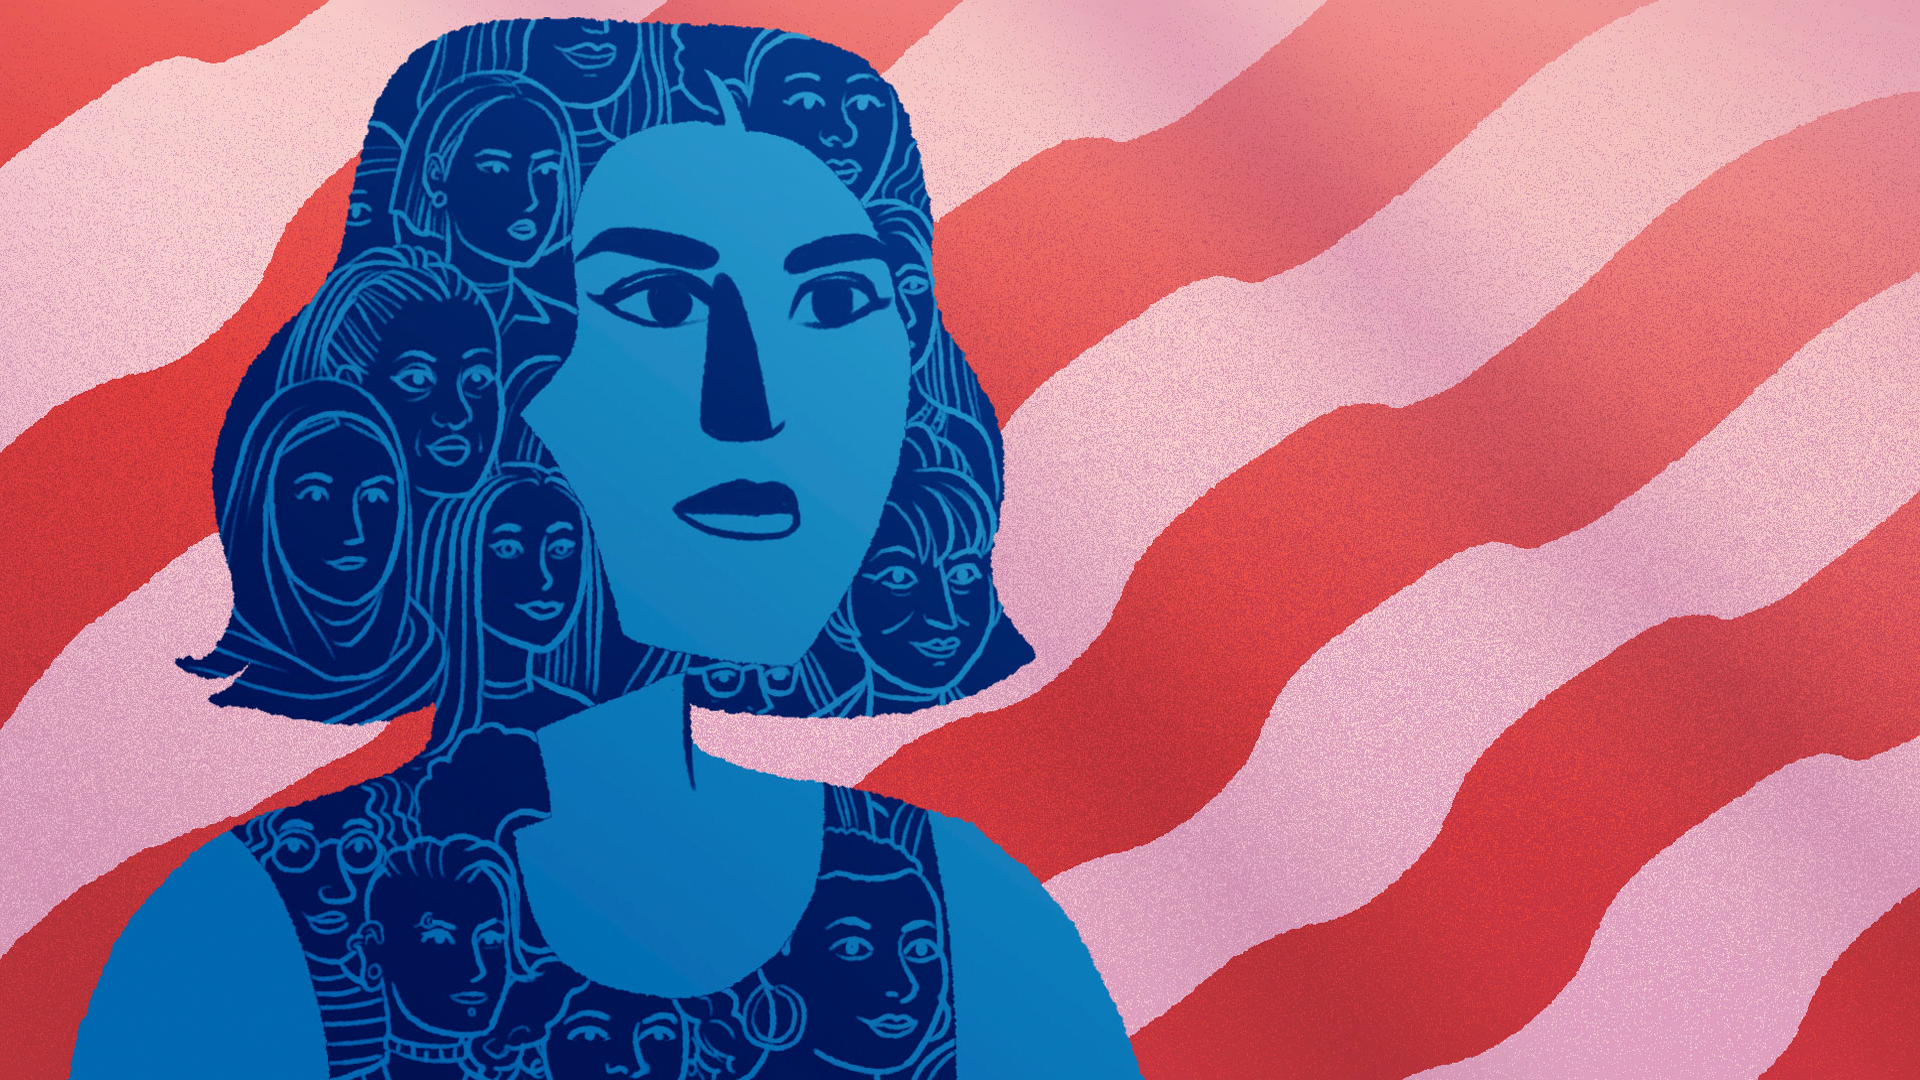 illustration of blue-tinted woman with silhouettes of other women in her hair, in front of backdrop of US flag red and white stripes